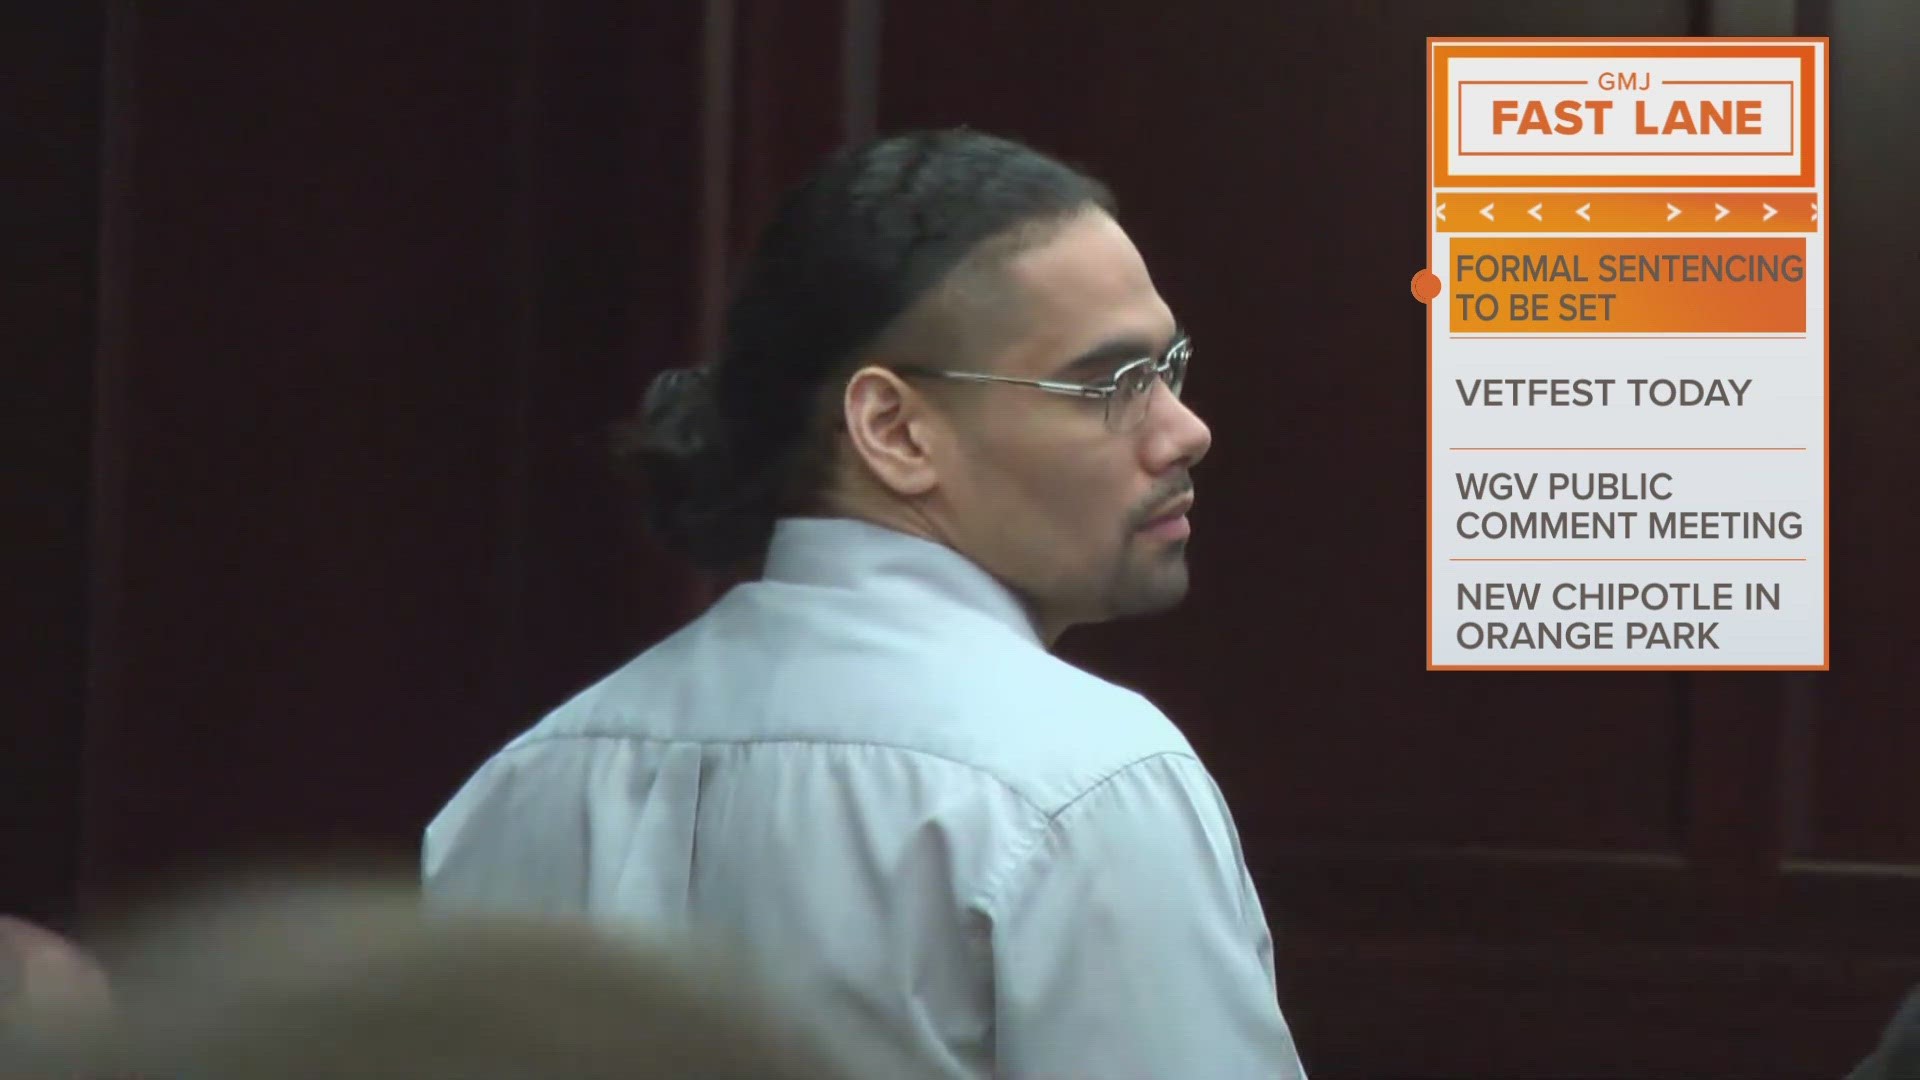 Quiles will serve life in prison after he was convicted of murdering his pregnant niece on Monday.